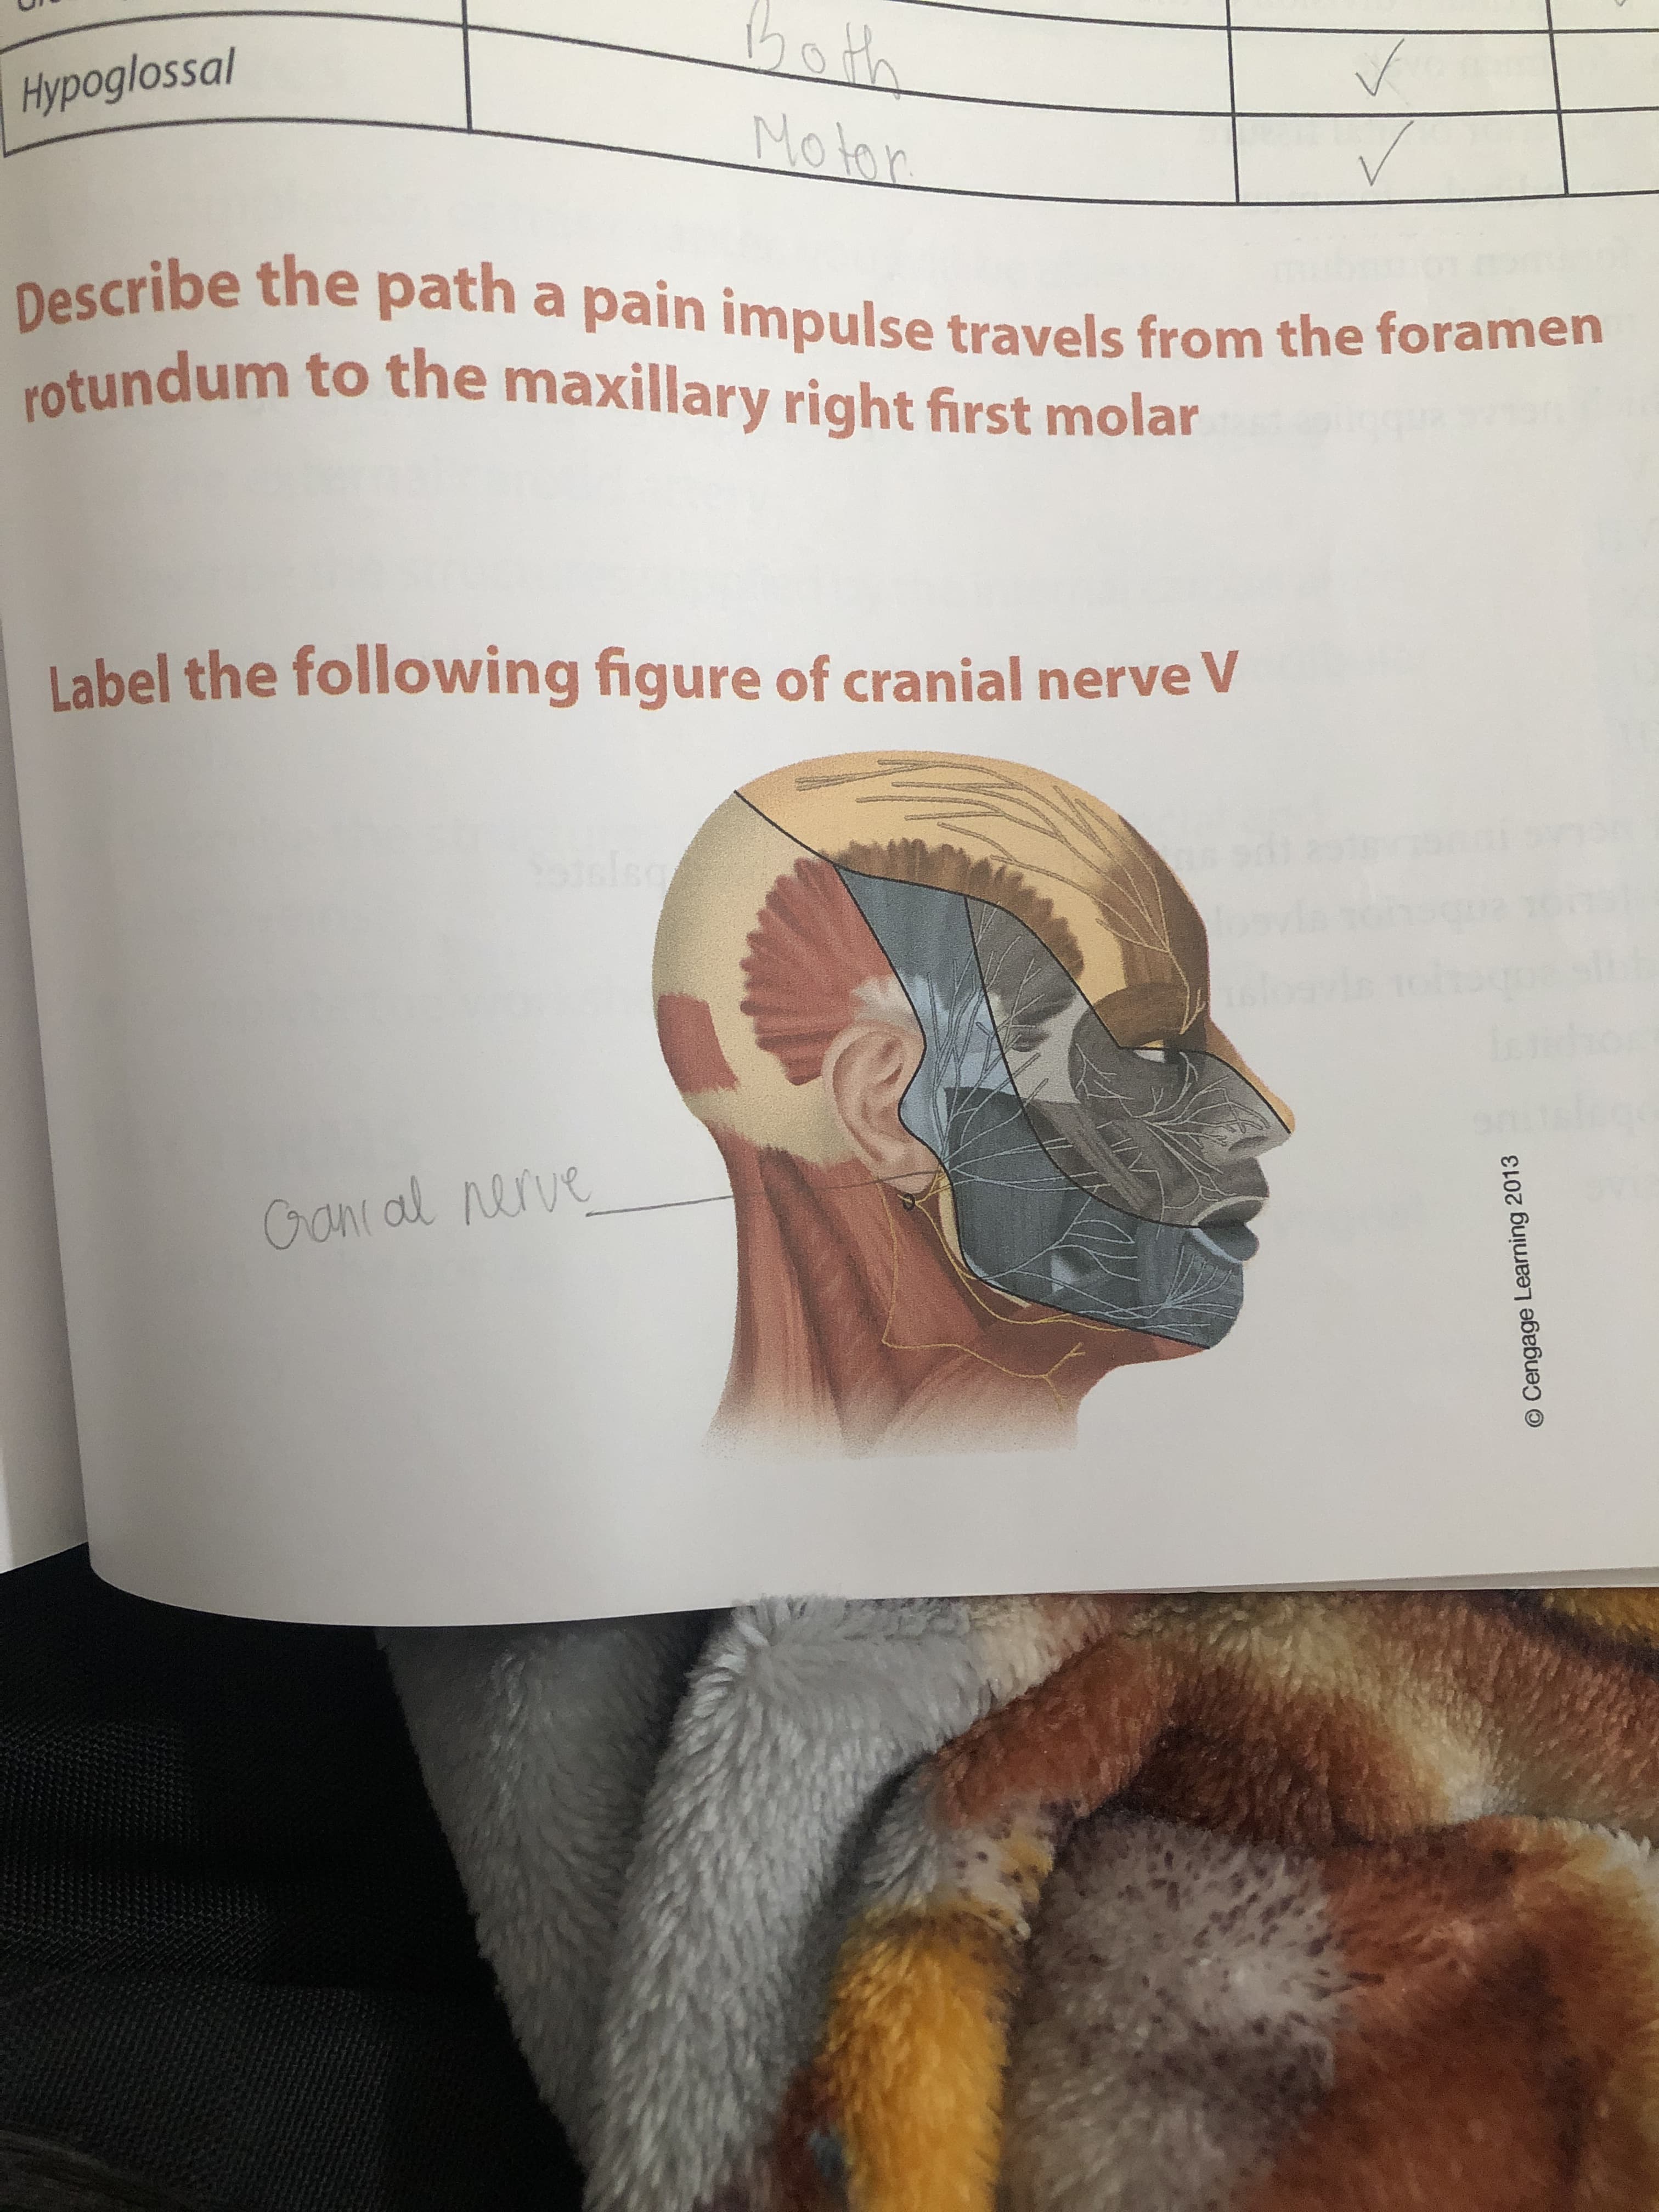 Describe the path a pain impulse travels from the foramen
votundum to the maxillary right first molar
Label the following figure of cranial nerve V
